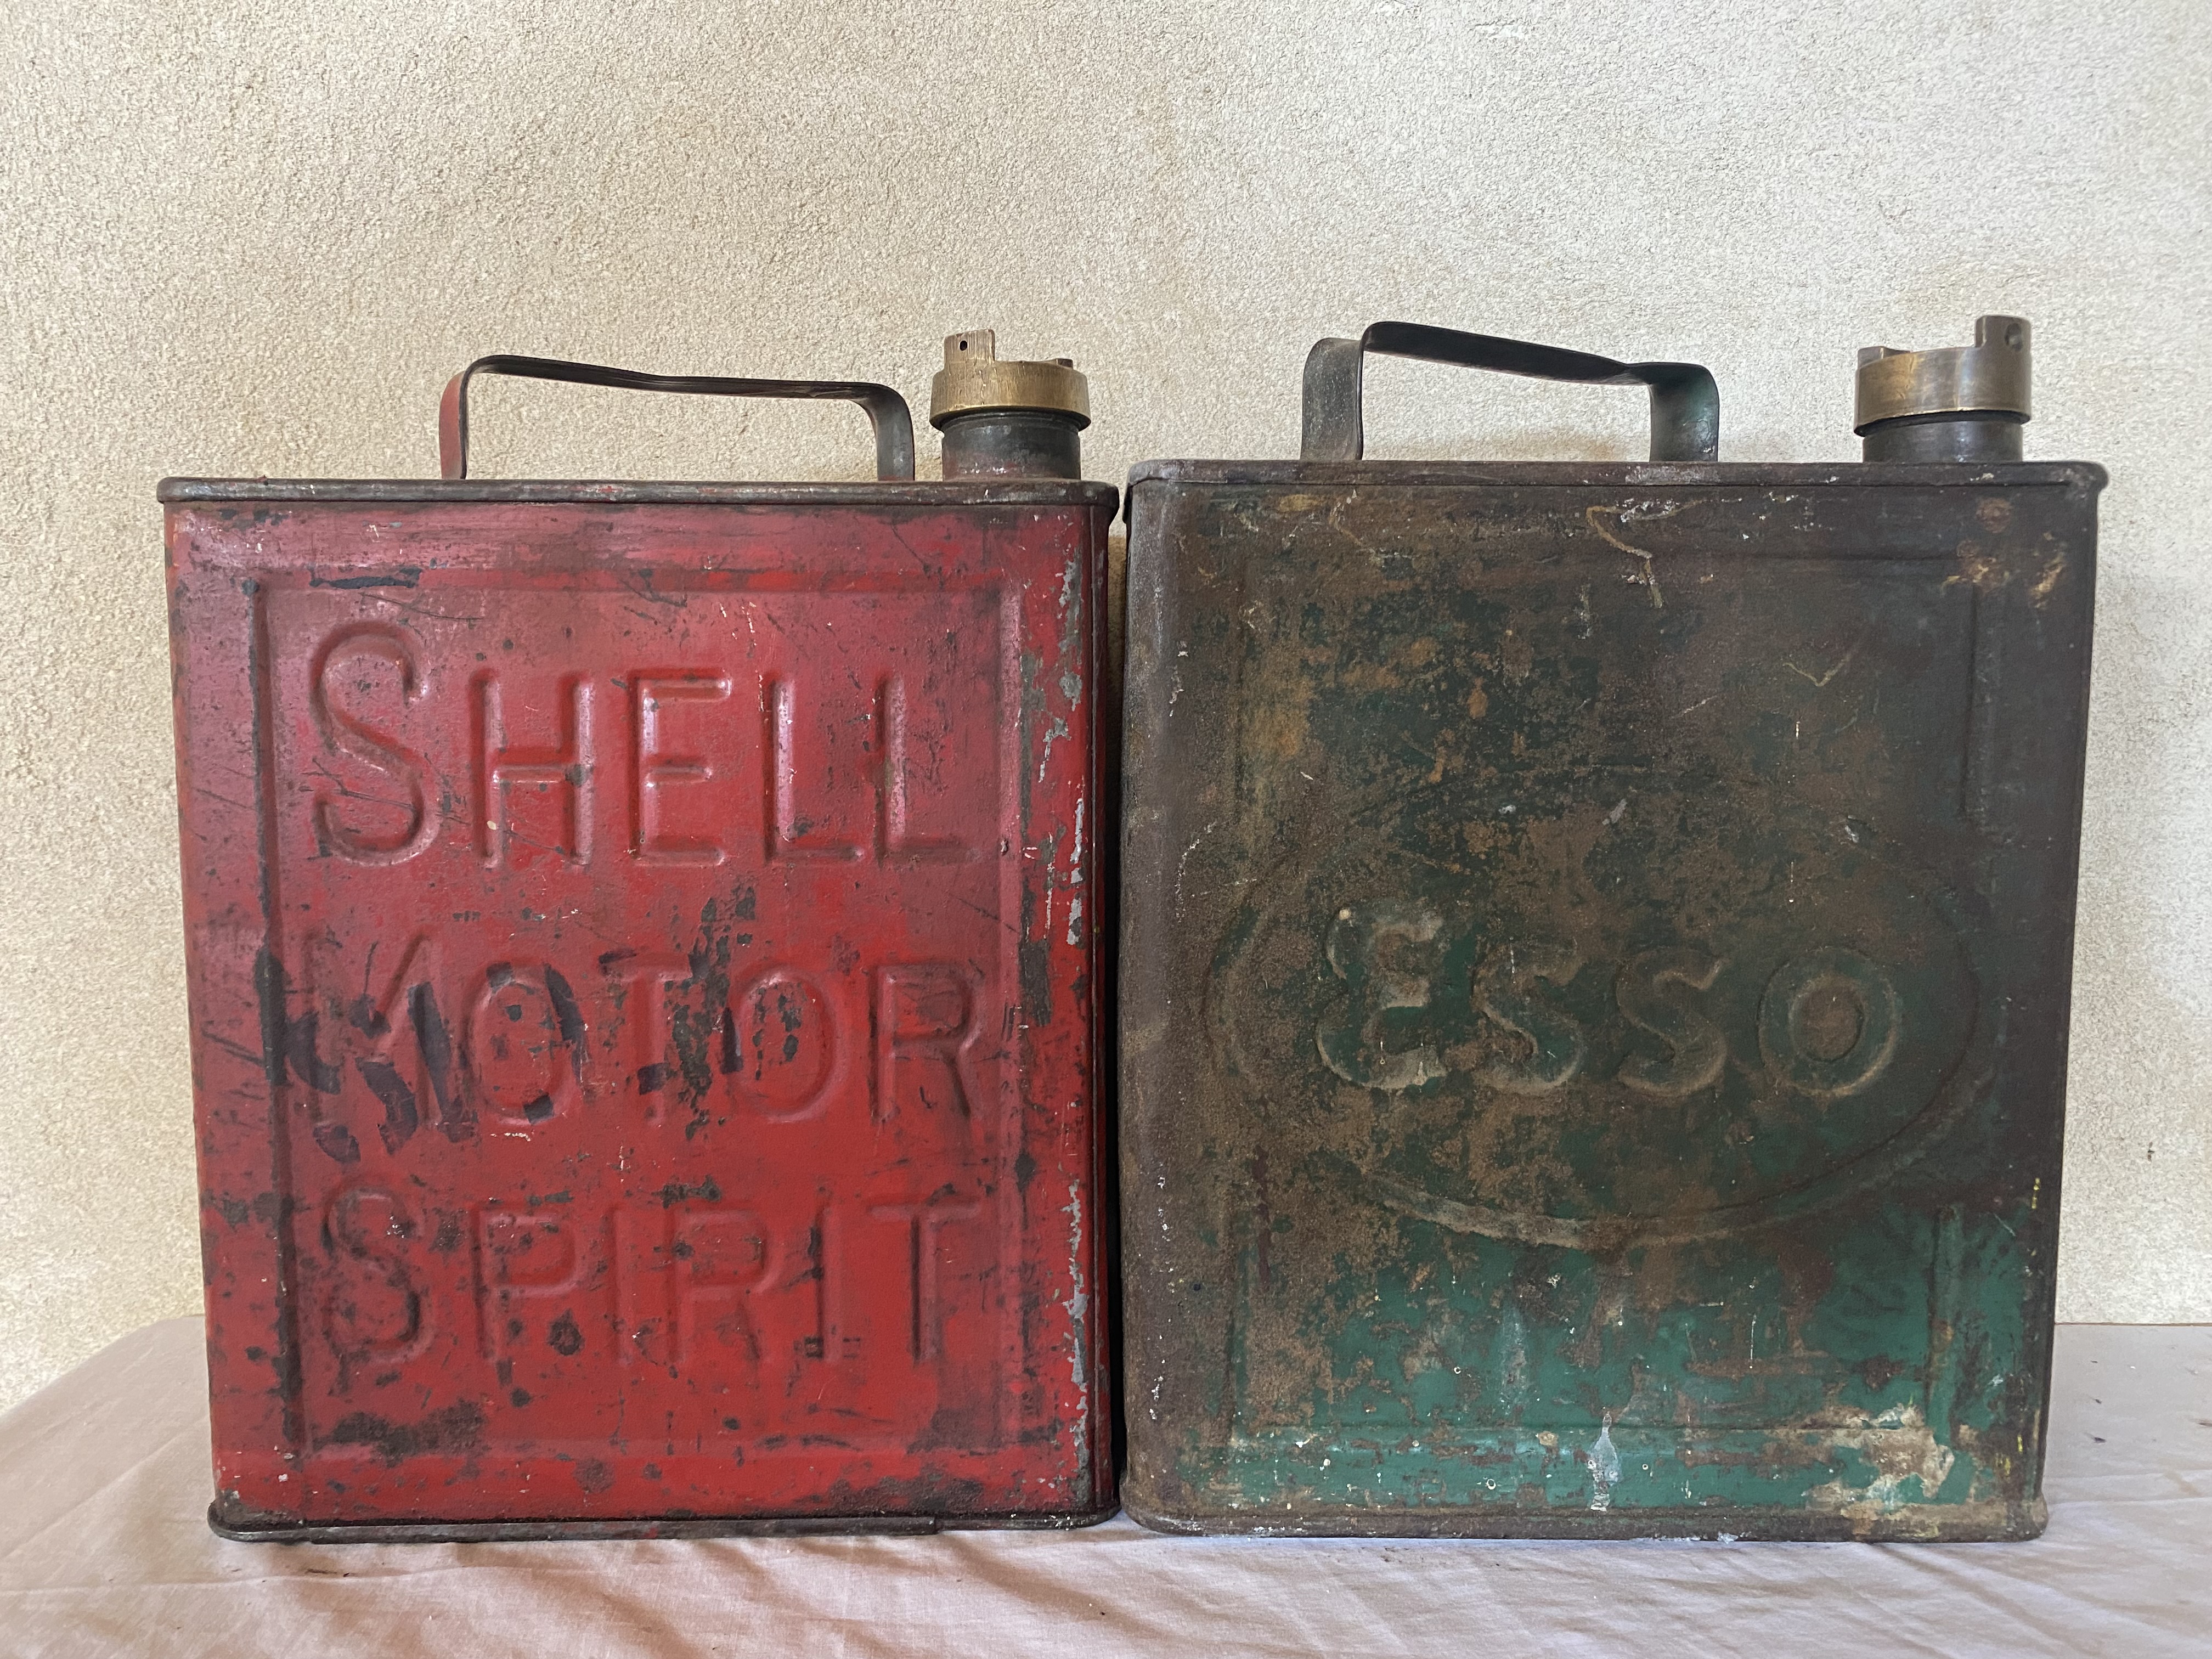 A Shell Motor Spirit two gallon petrol can by Valor and an Esso can, dated November 1936. - Image 2 of 4